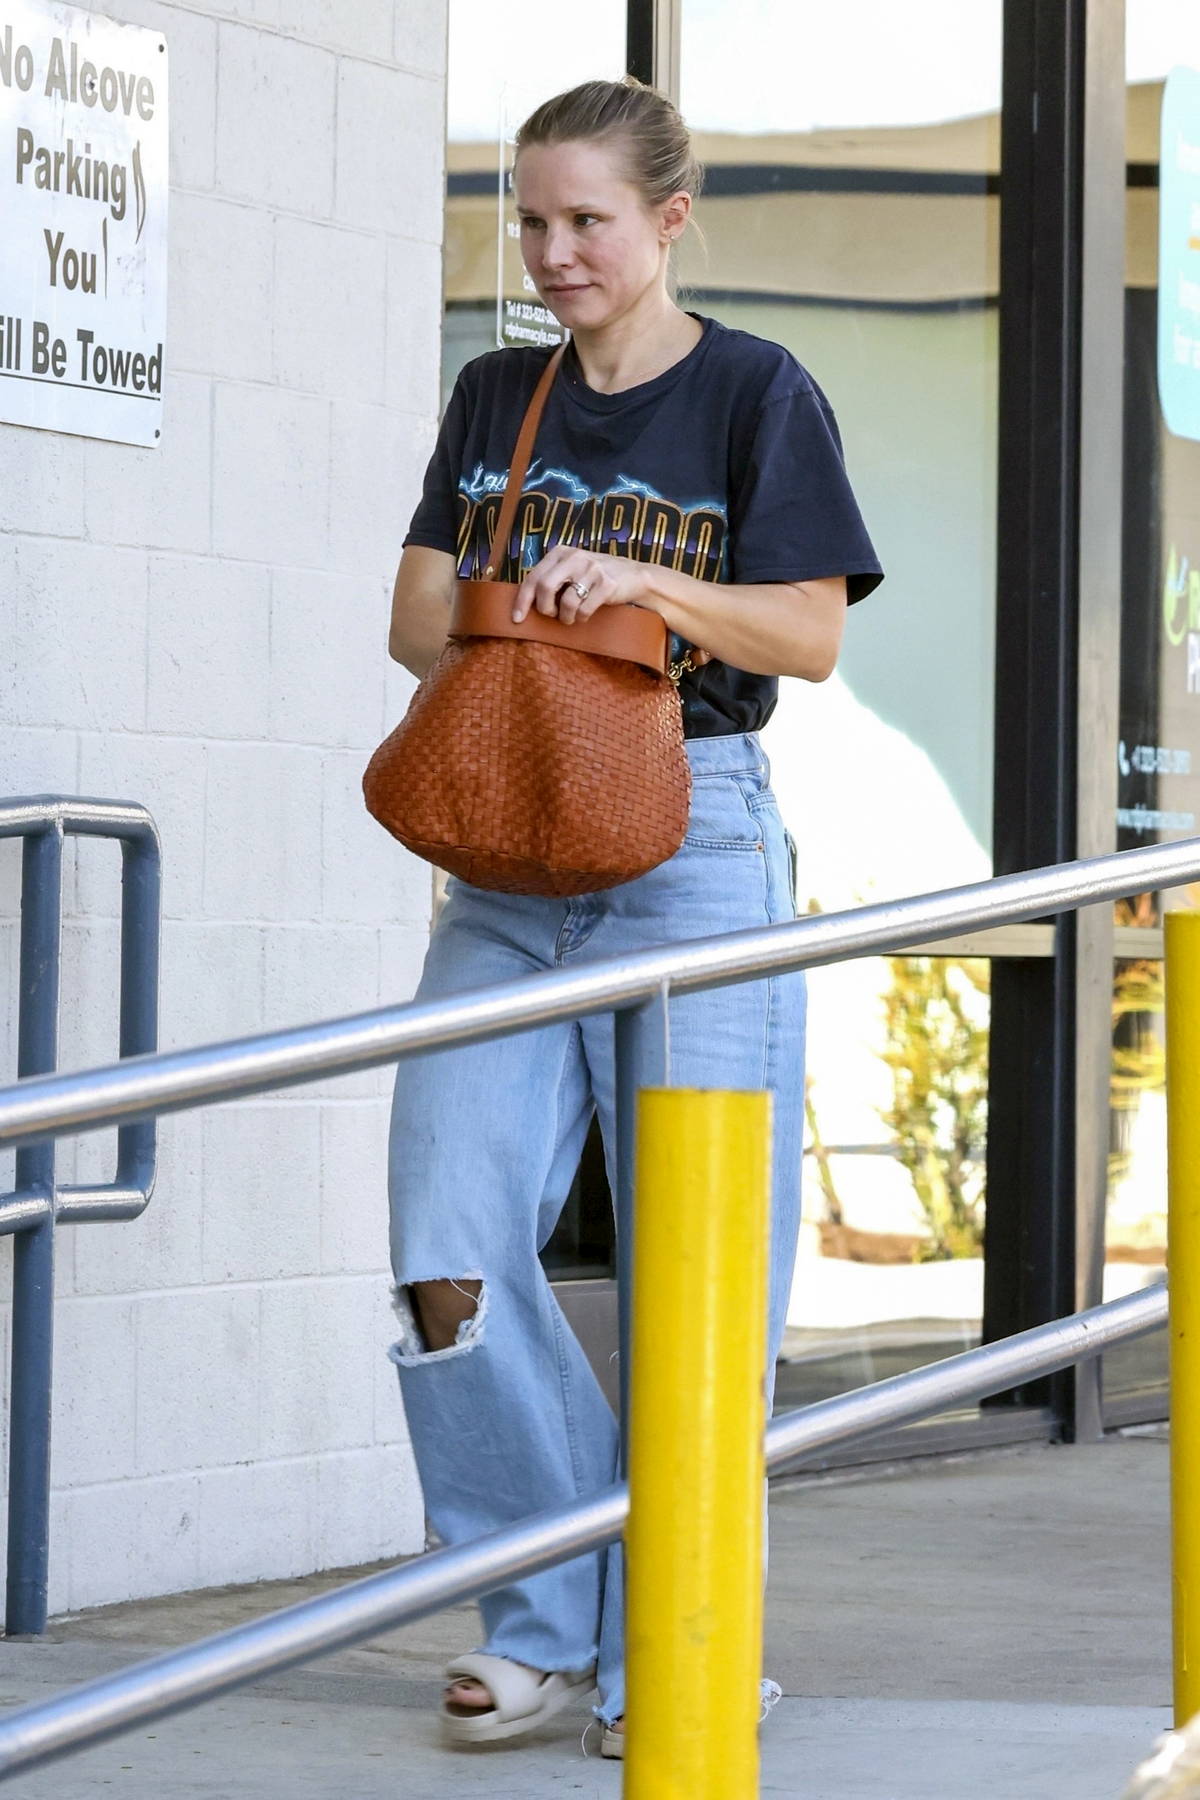 kristen bell wears a floral crop top and jeans while out shopping with her  mother in los feliz, california-070522_7